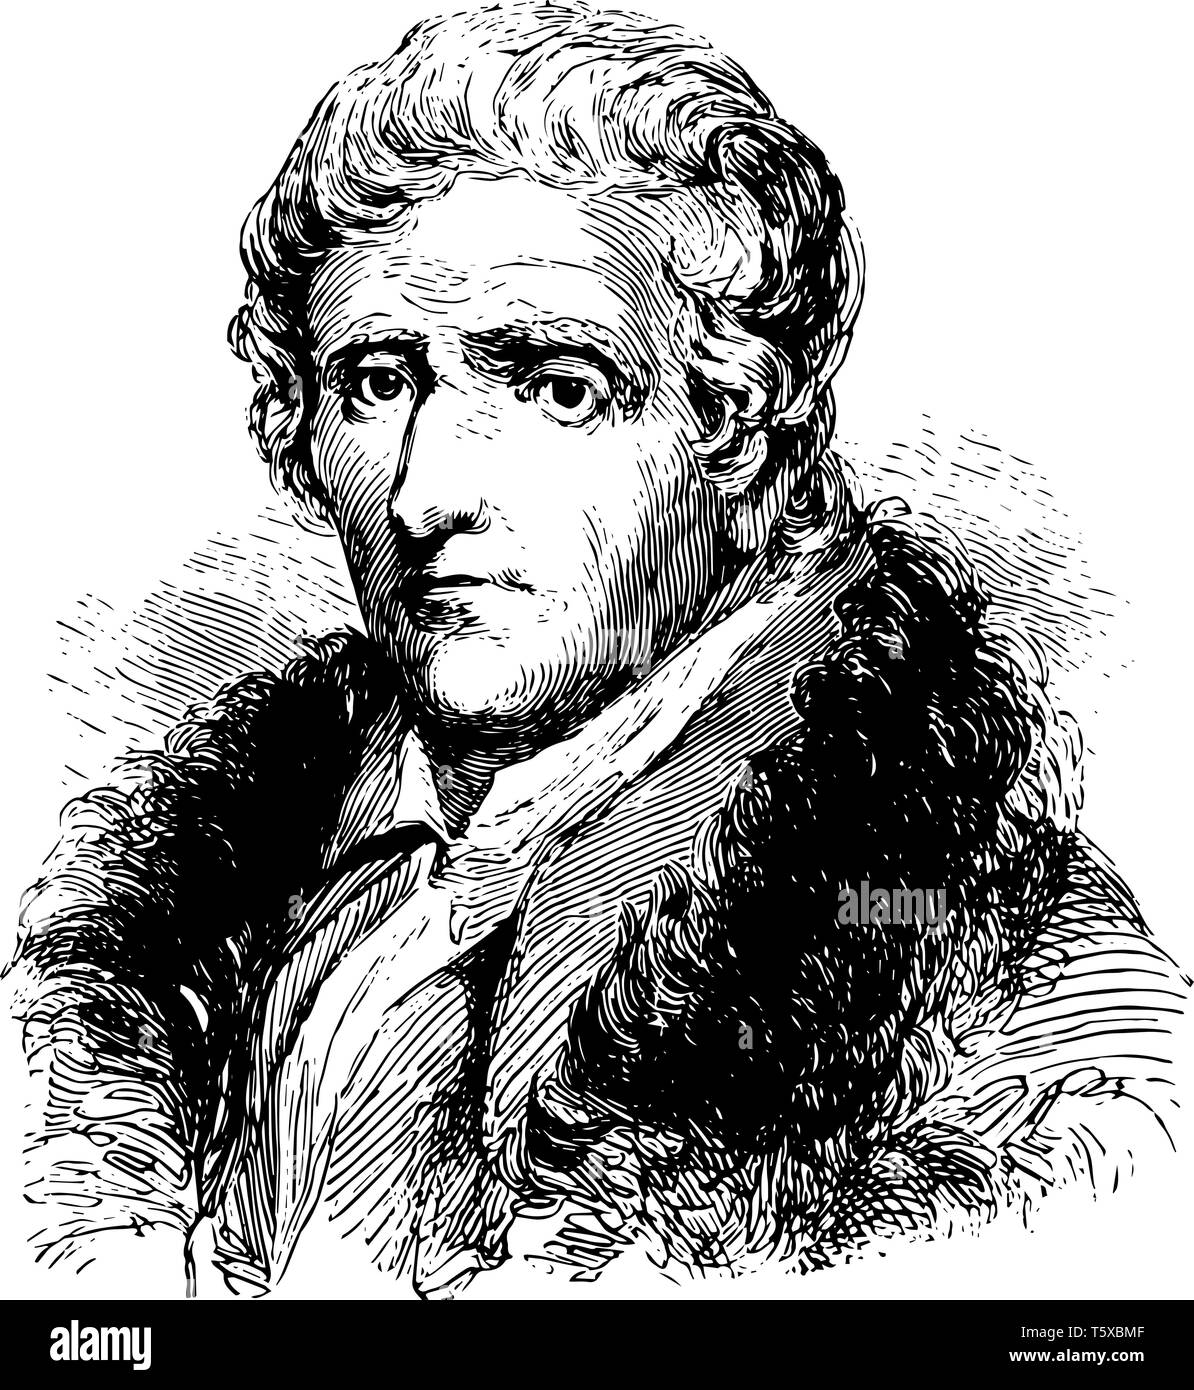 Daniel Boone 1734 to 1820 he was an American pioneer explorer frontiersman and one of the first folk heroes of the United States famous for his explor Stock Vector